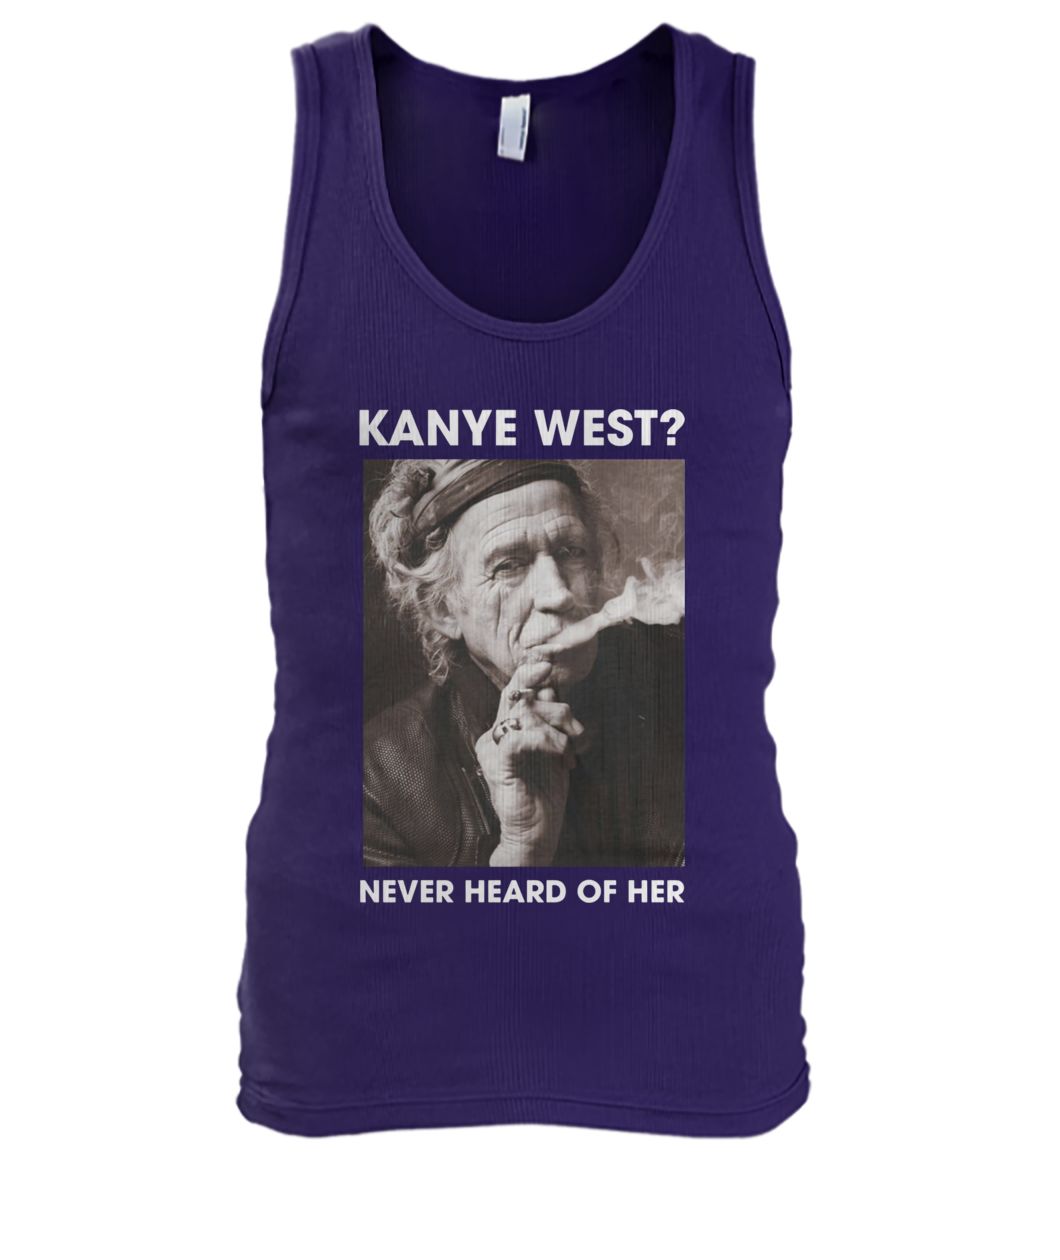 Keith richards kanye west never heard of her men's tank top